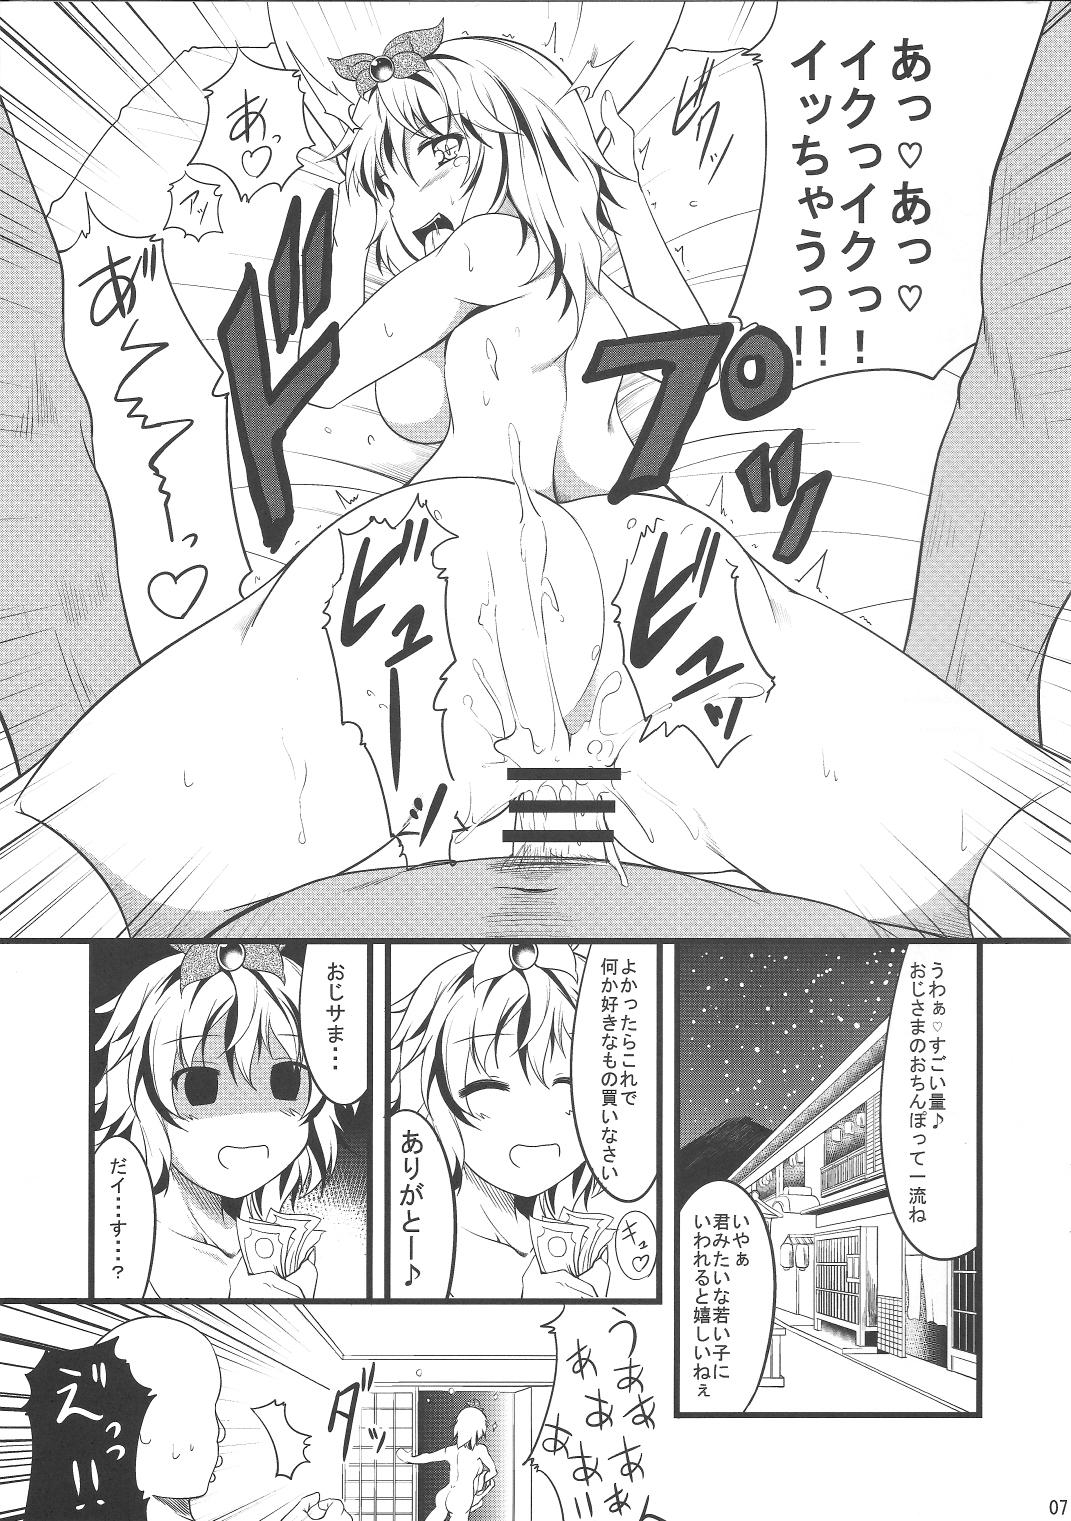 Zorra Jouyoku no Tora - Tiger of passion - Touhou project New - Page 6